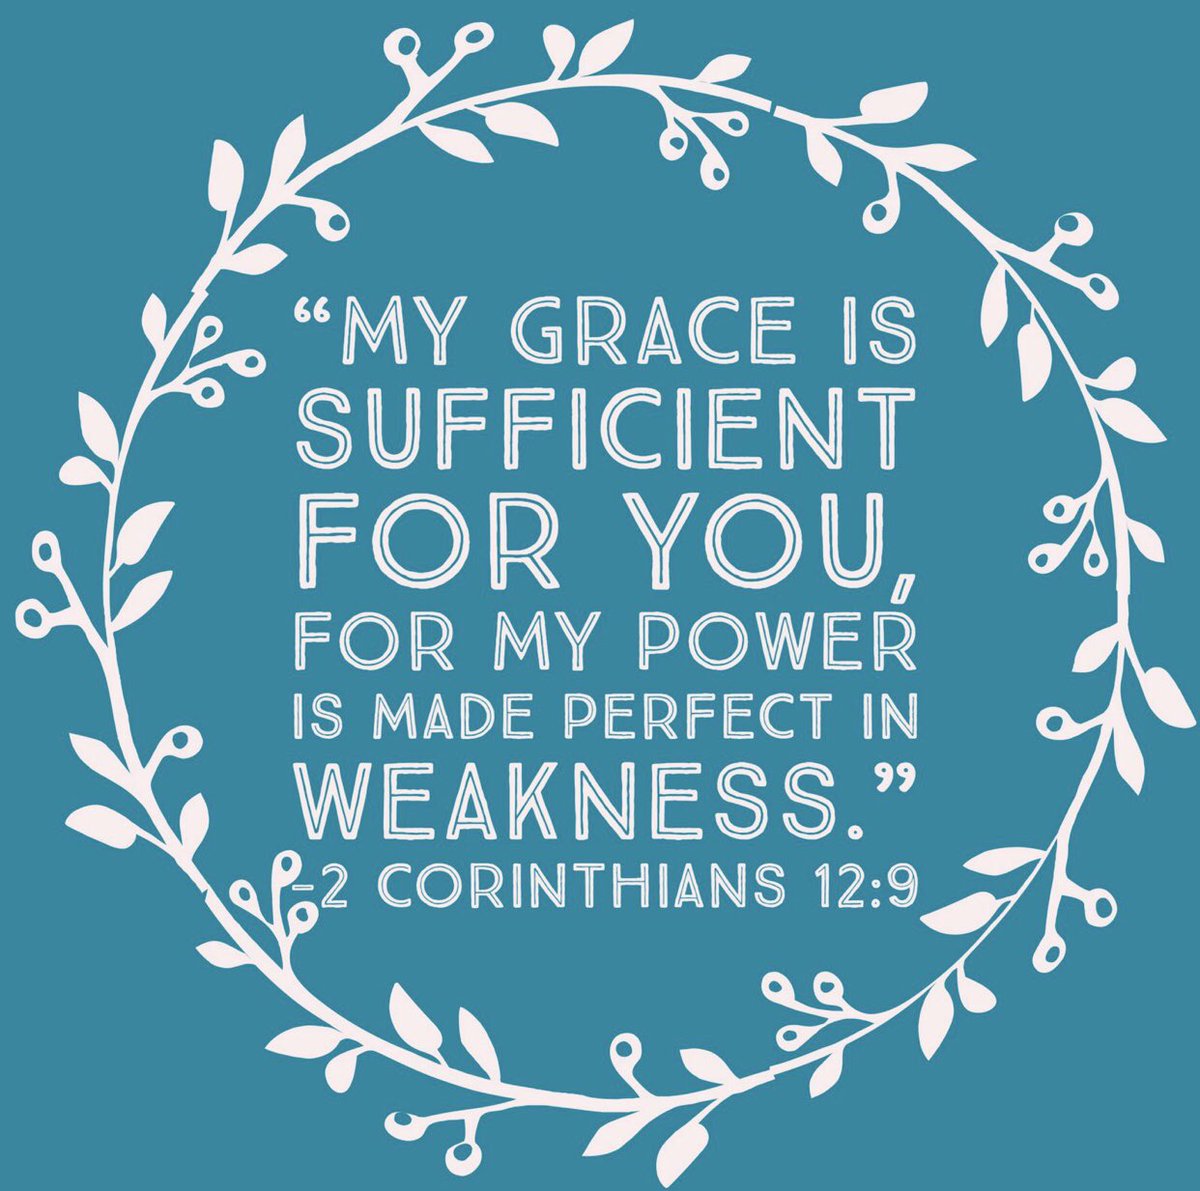 Whatever you may face this week Gods grace & power WILL be sufficient. Reflect His glory in all situations. #grace #power #reflect #reflectHisglory #lightpointc